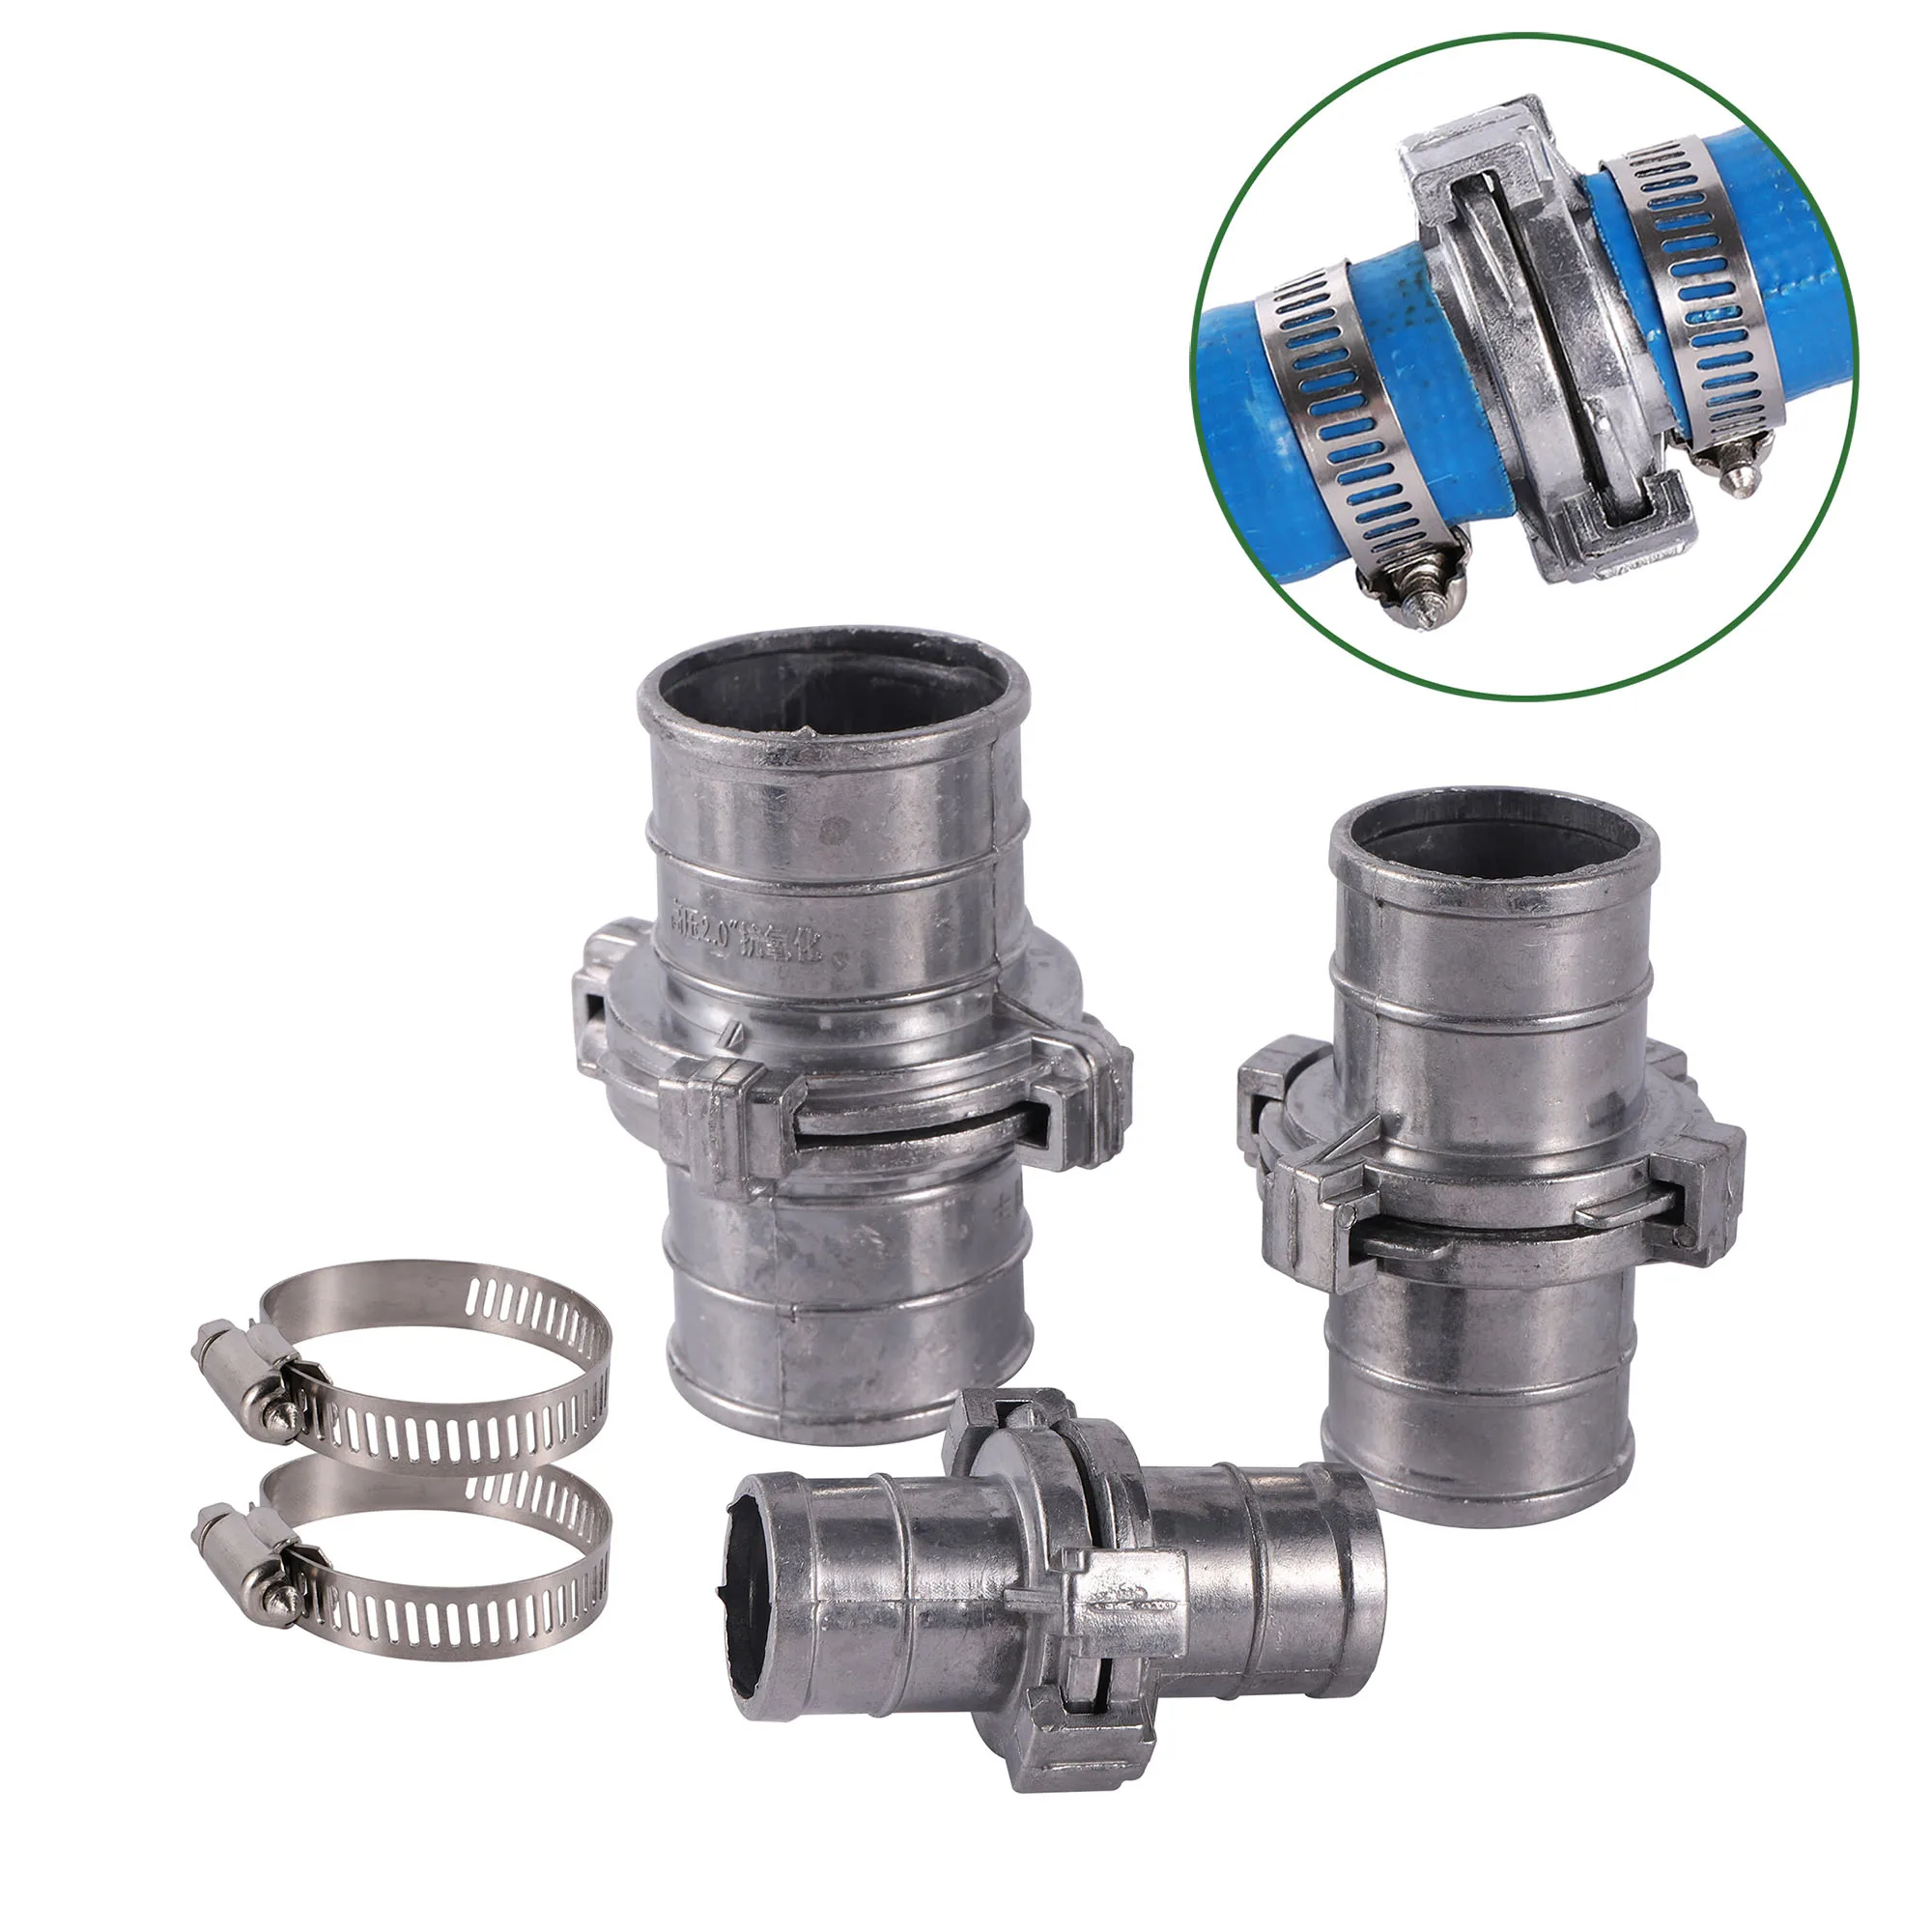 Quick Coupling For Water Pipe Aluminum Pipe Fitting Hose Quick Connector With Clamp Fire Hose Agriculture Irrigation Accessories